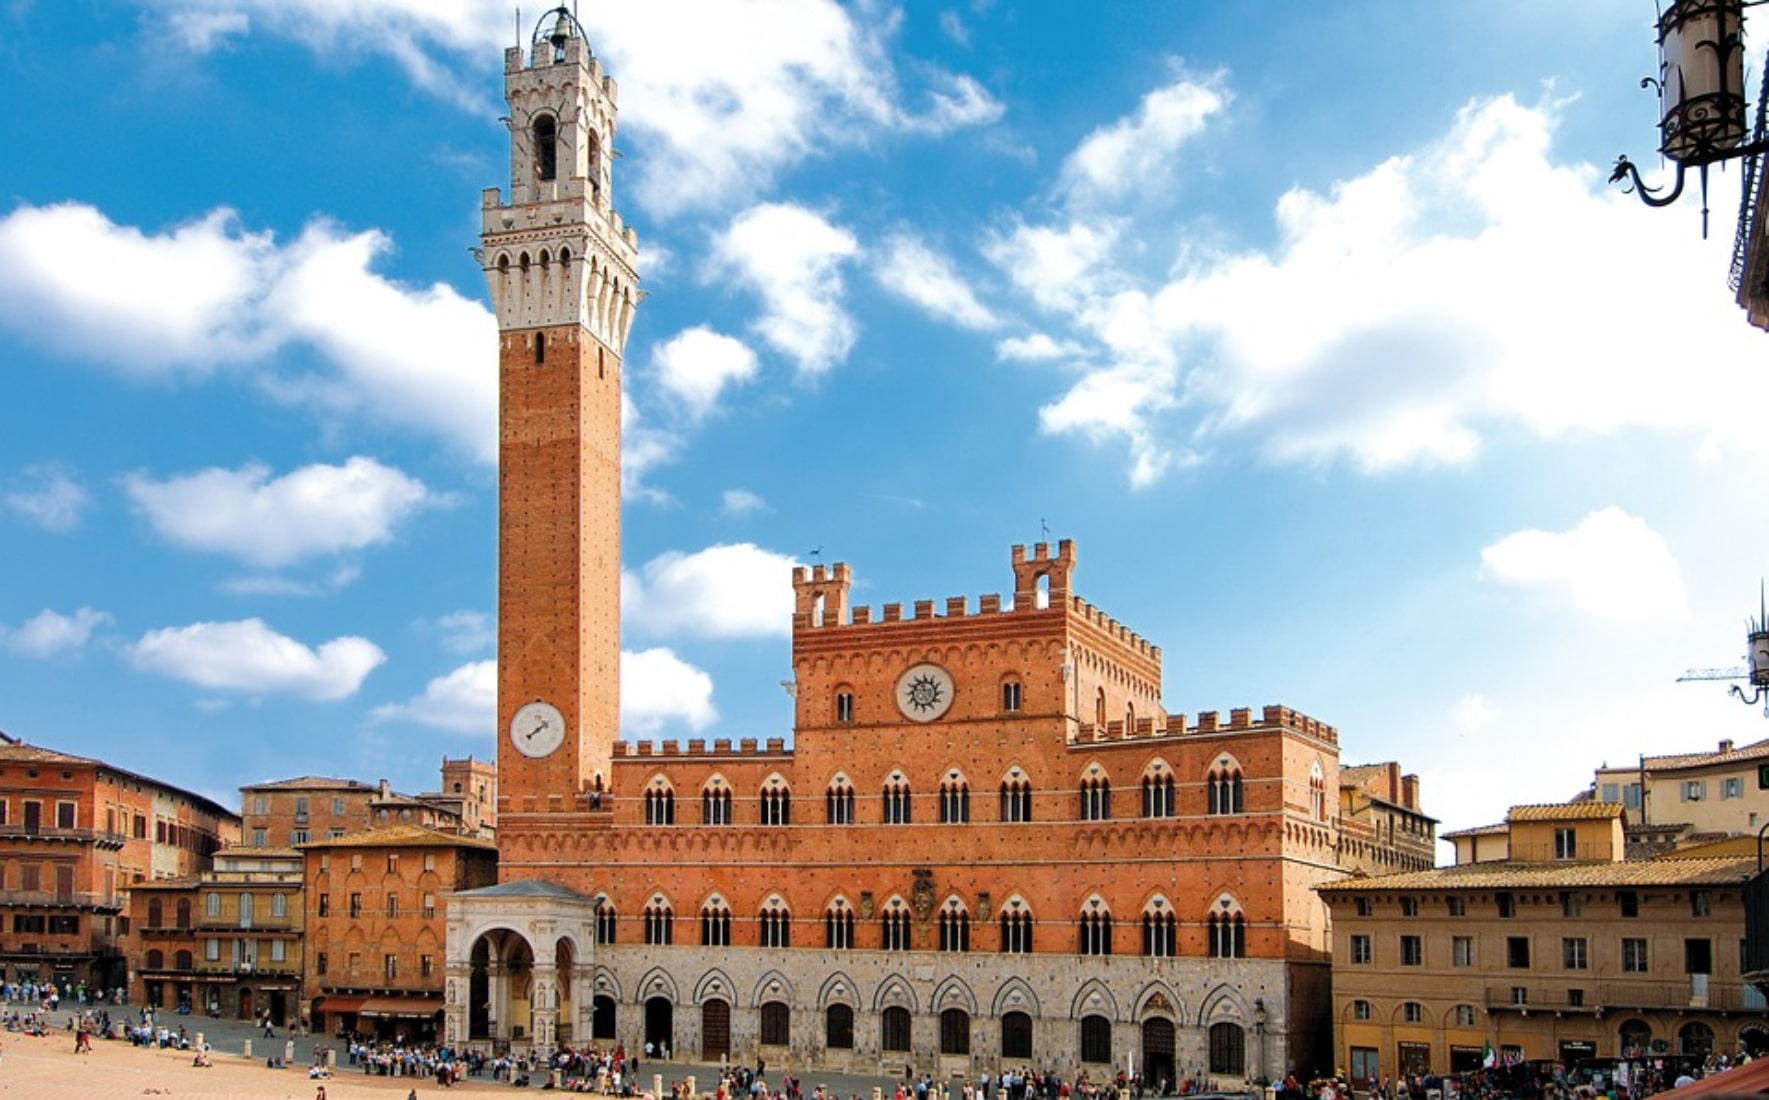 Piazza del Campo and surroundings